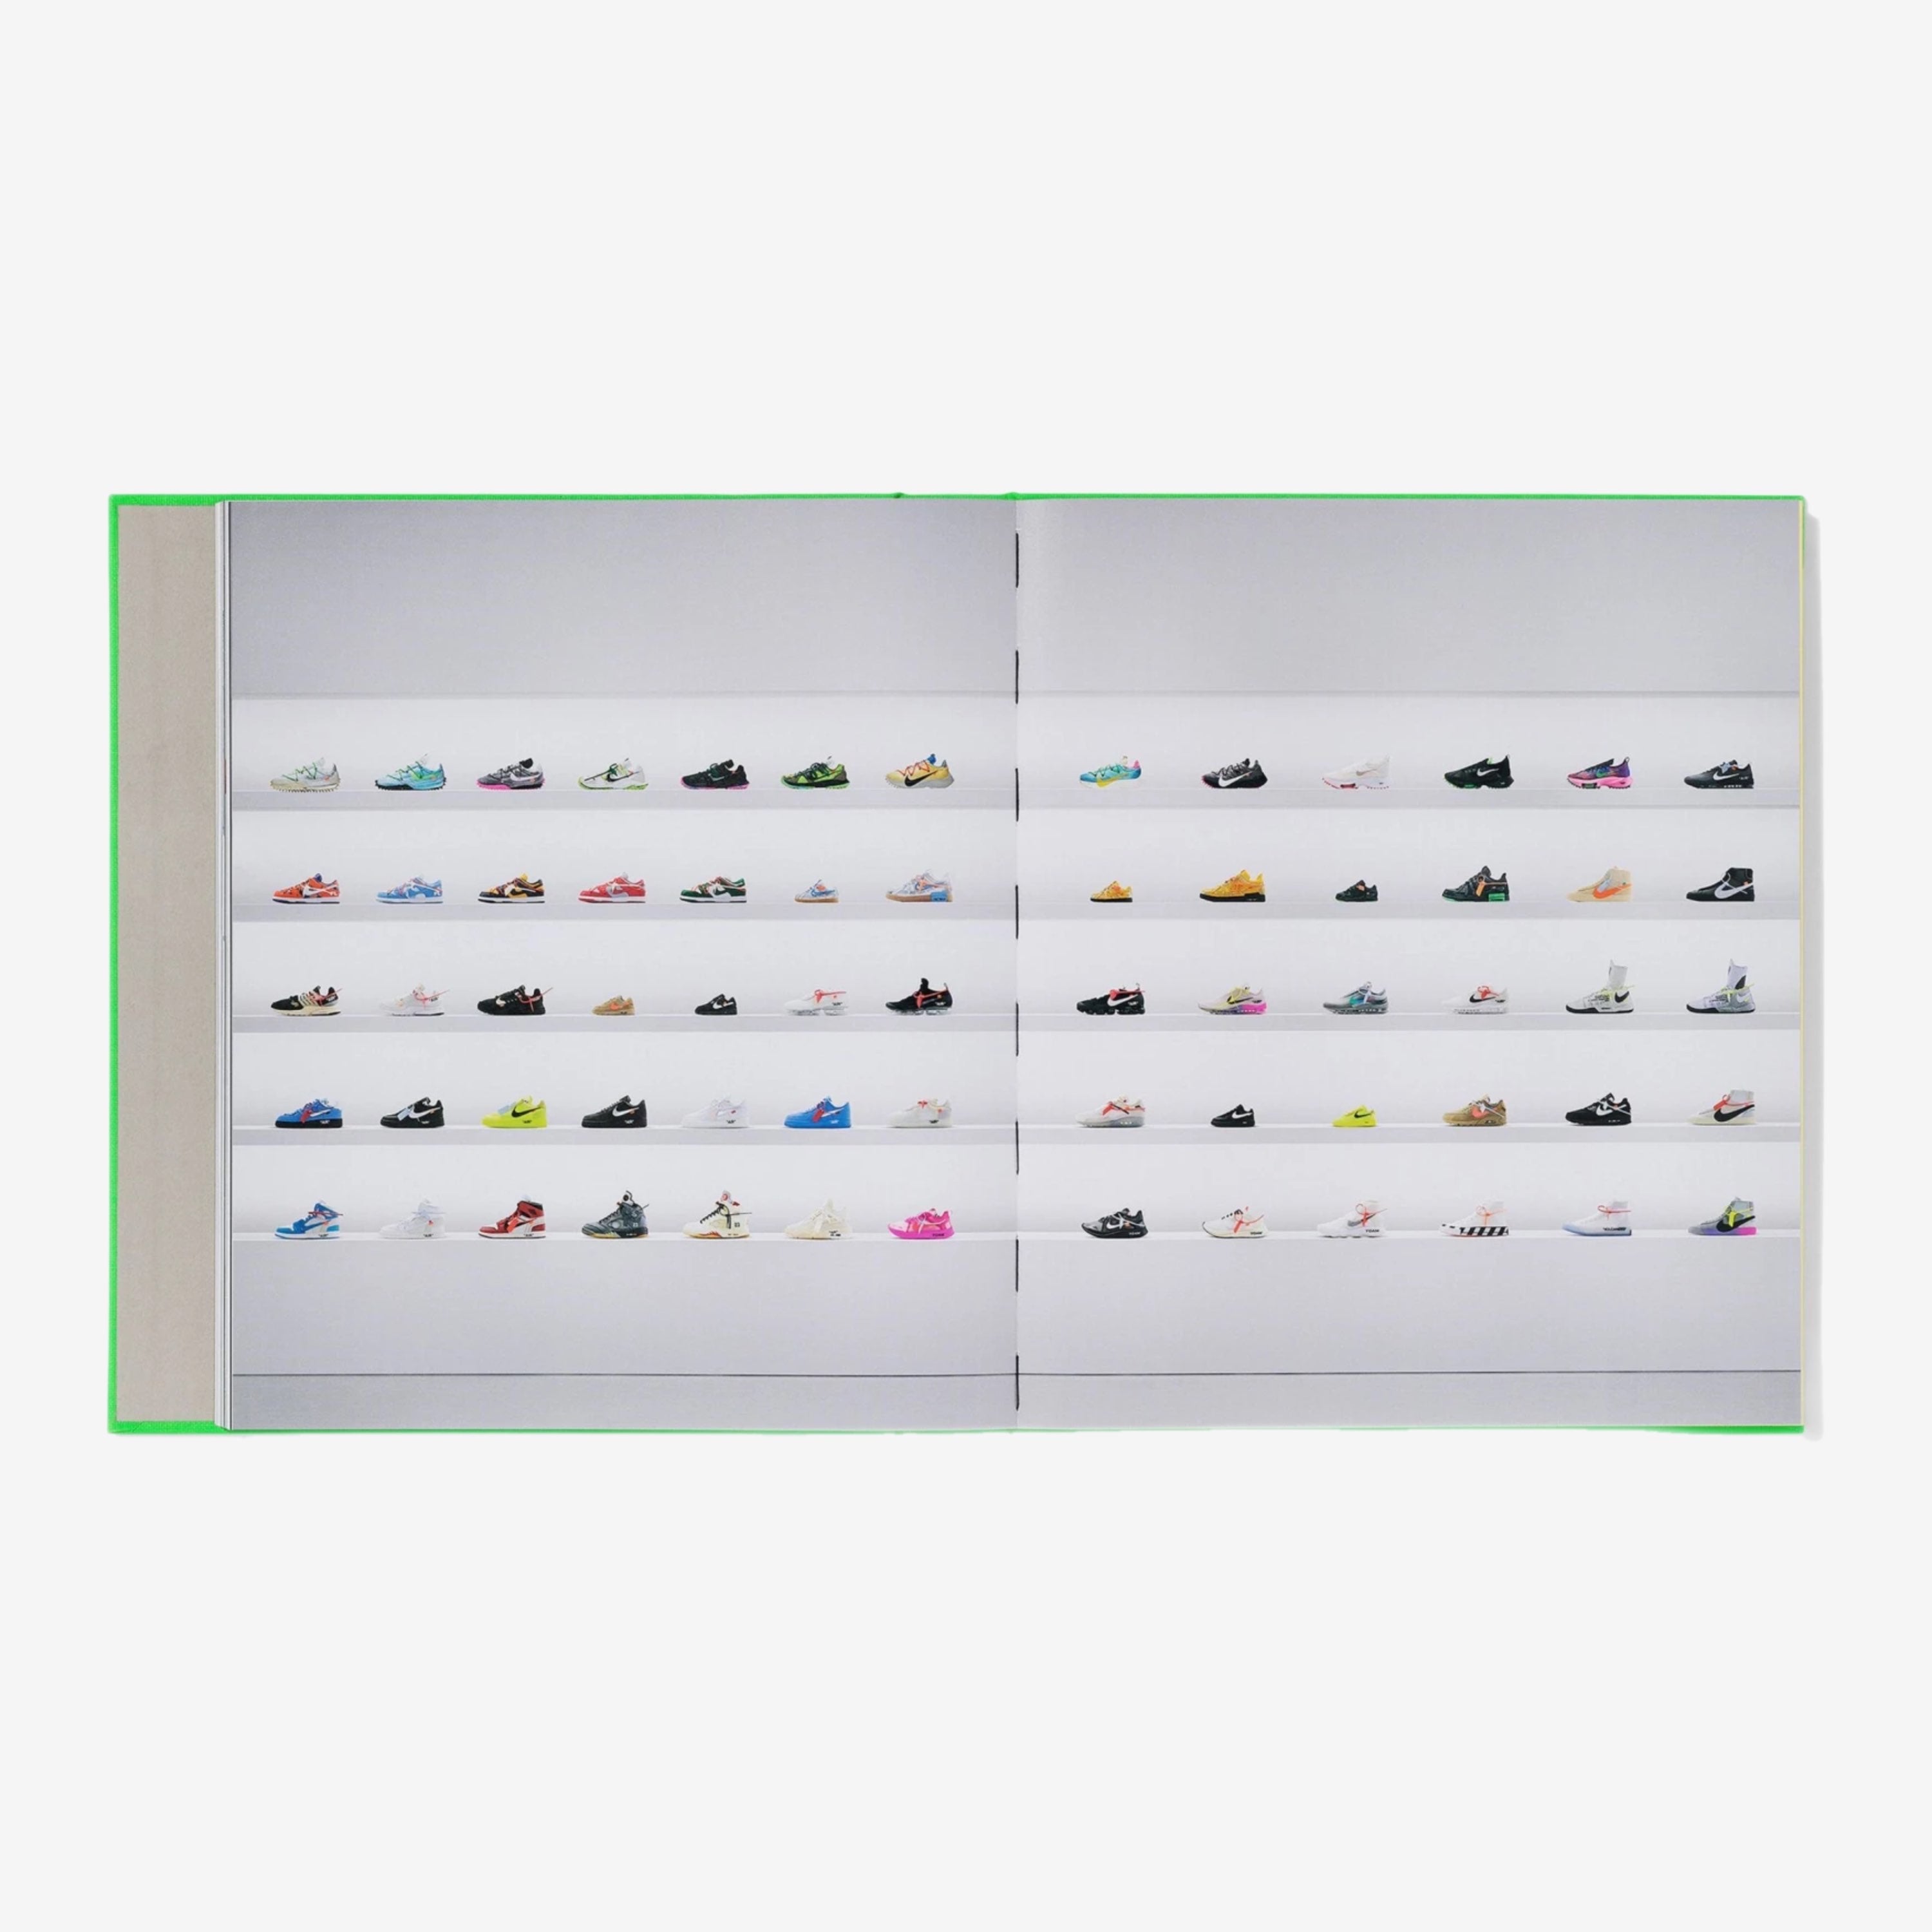 ‘SOMETHING’S OFF’ - Virgil Abloh x Nike ICONS “The Ten” Book